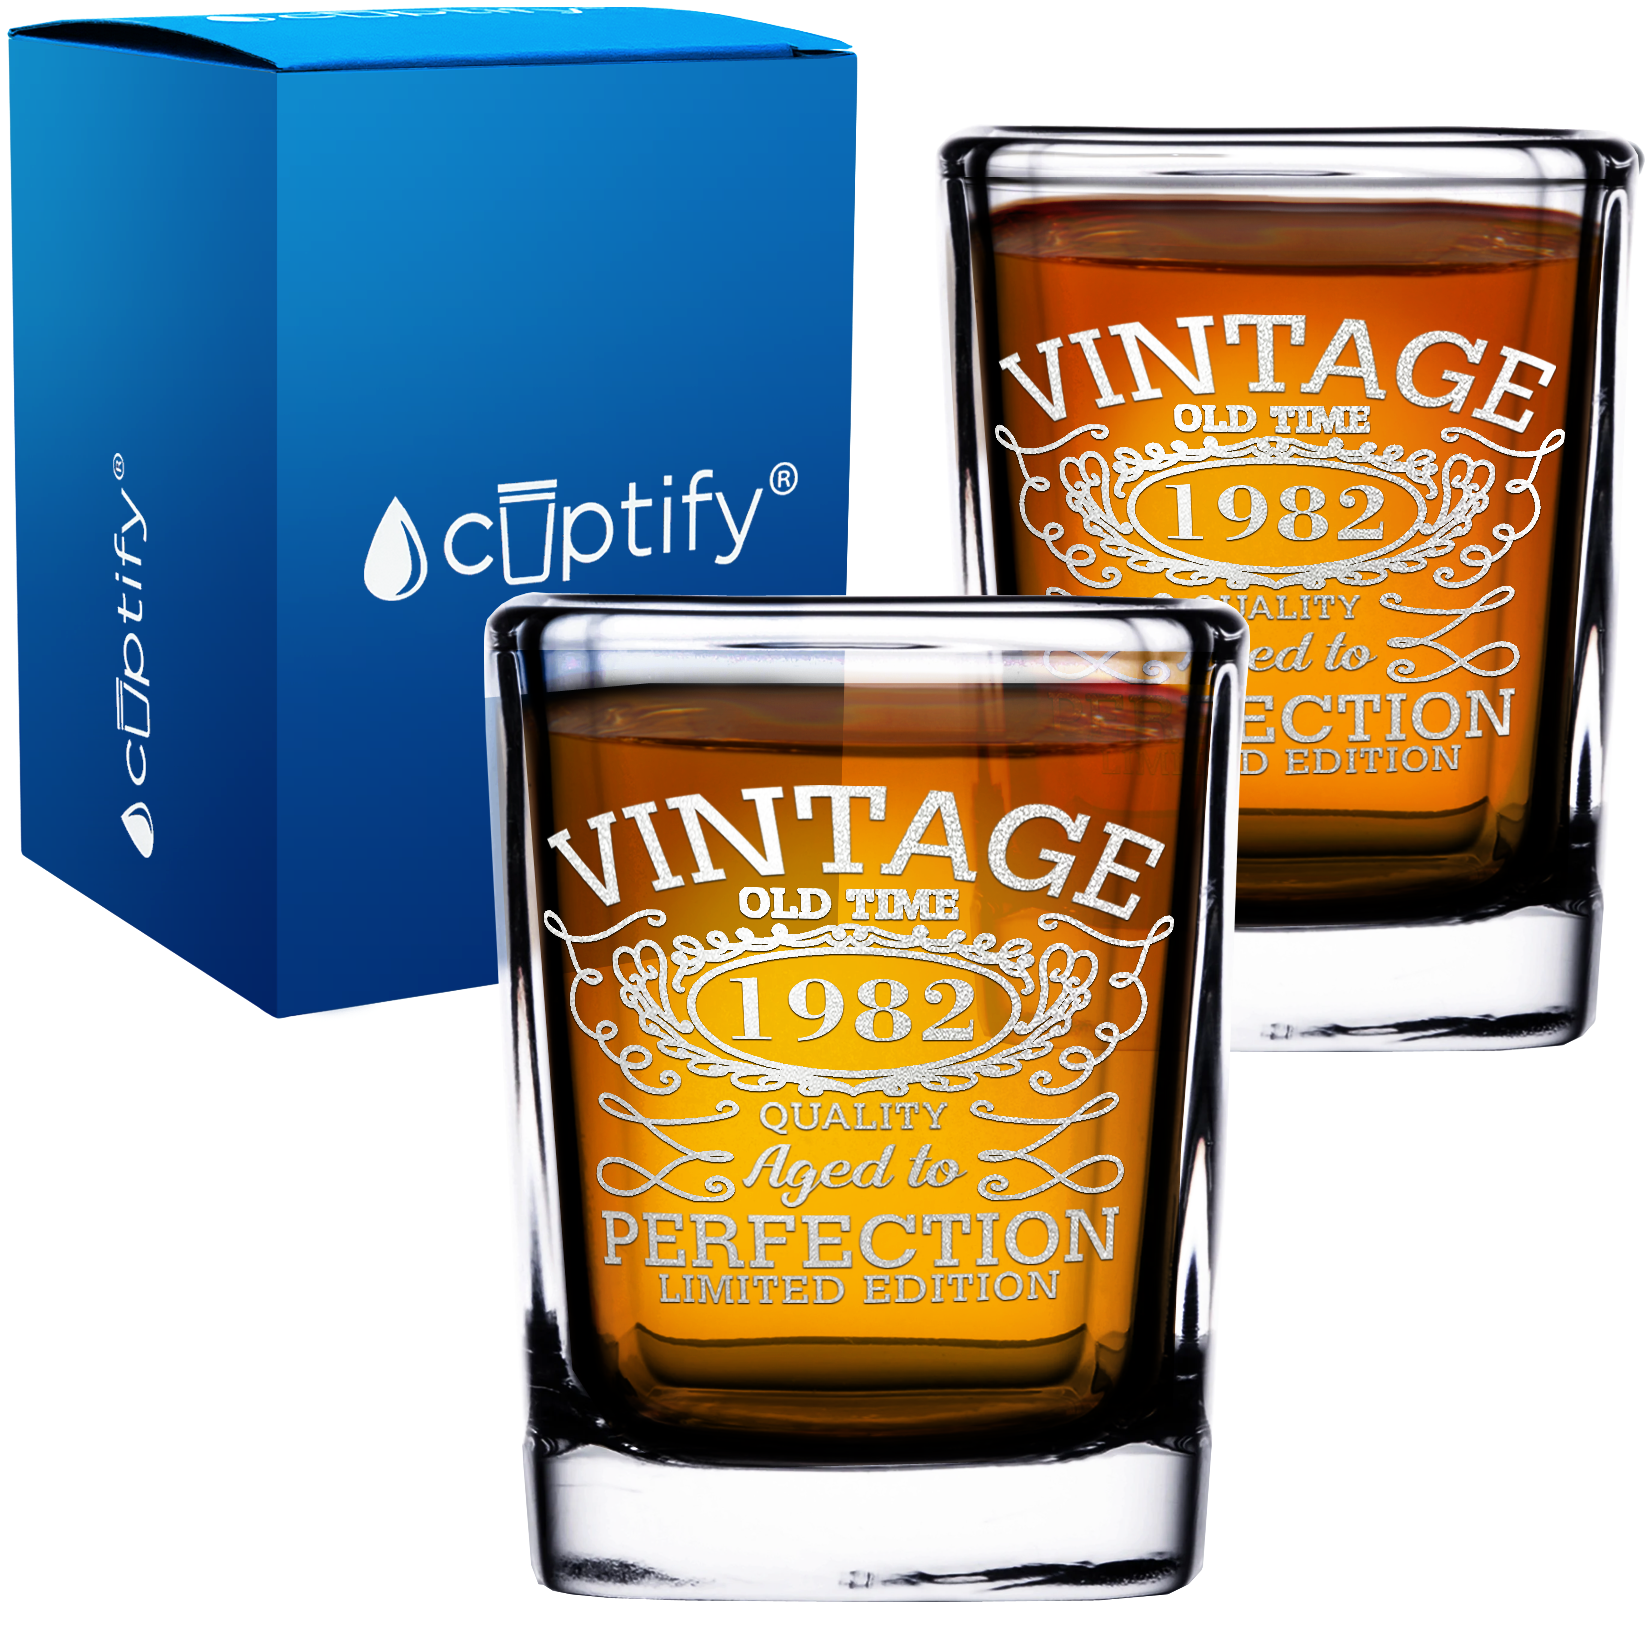 40th Birthday Vintage 40 Years Old Time 1982 Quality 2oz Square Shot Glasses - Set of 2